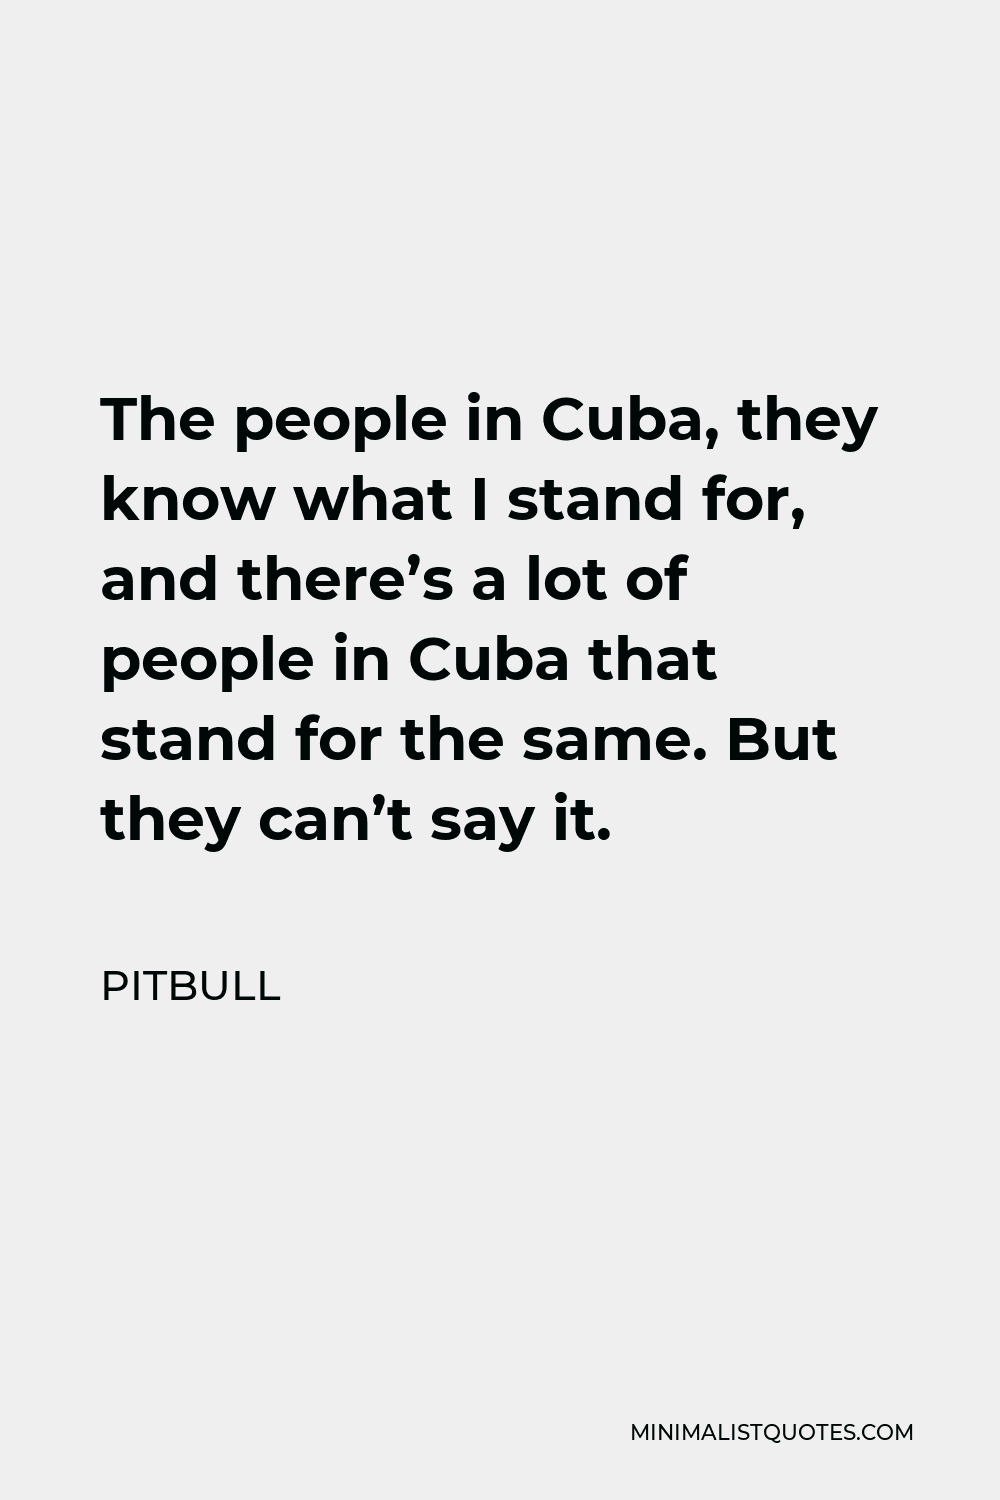 Pitbull Quote - The people in Cuba, they know what I stand for, and there’s a lot of people in Cuba that stand for the same. But they can’t say it.